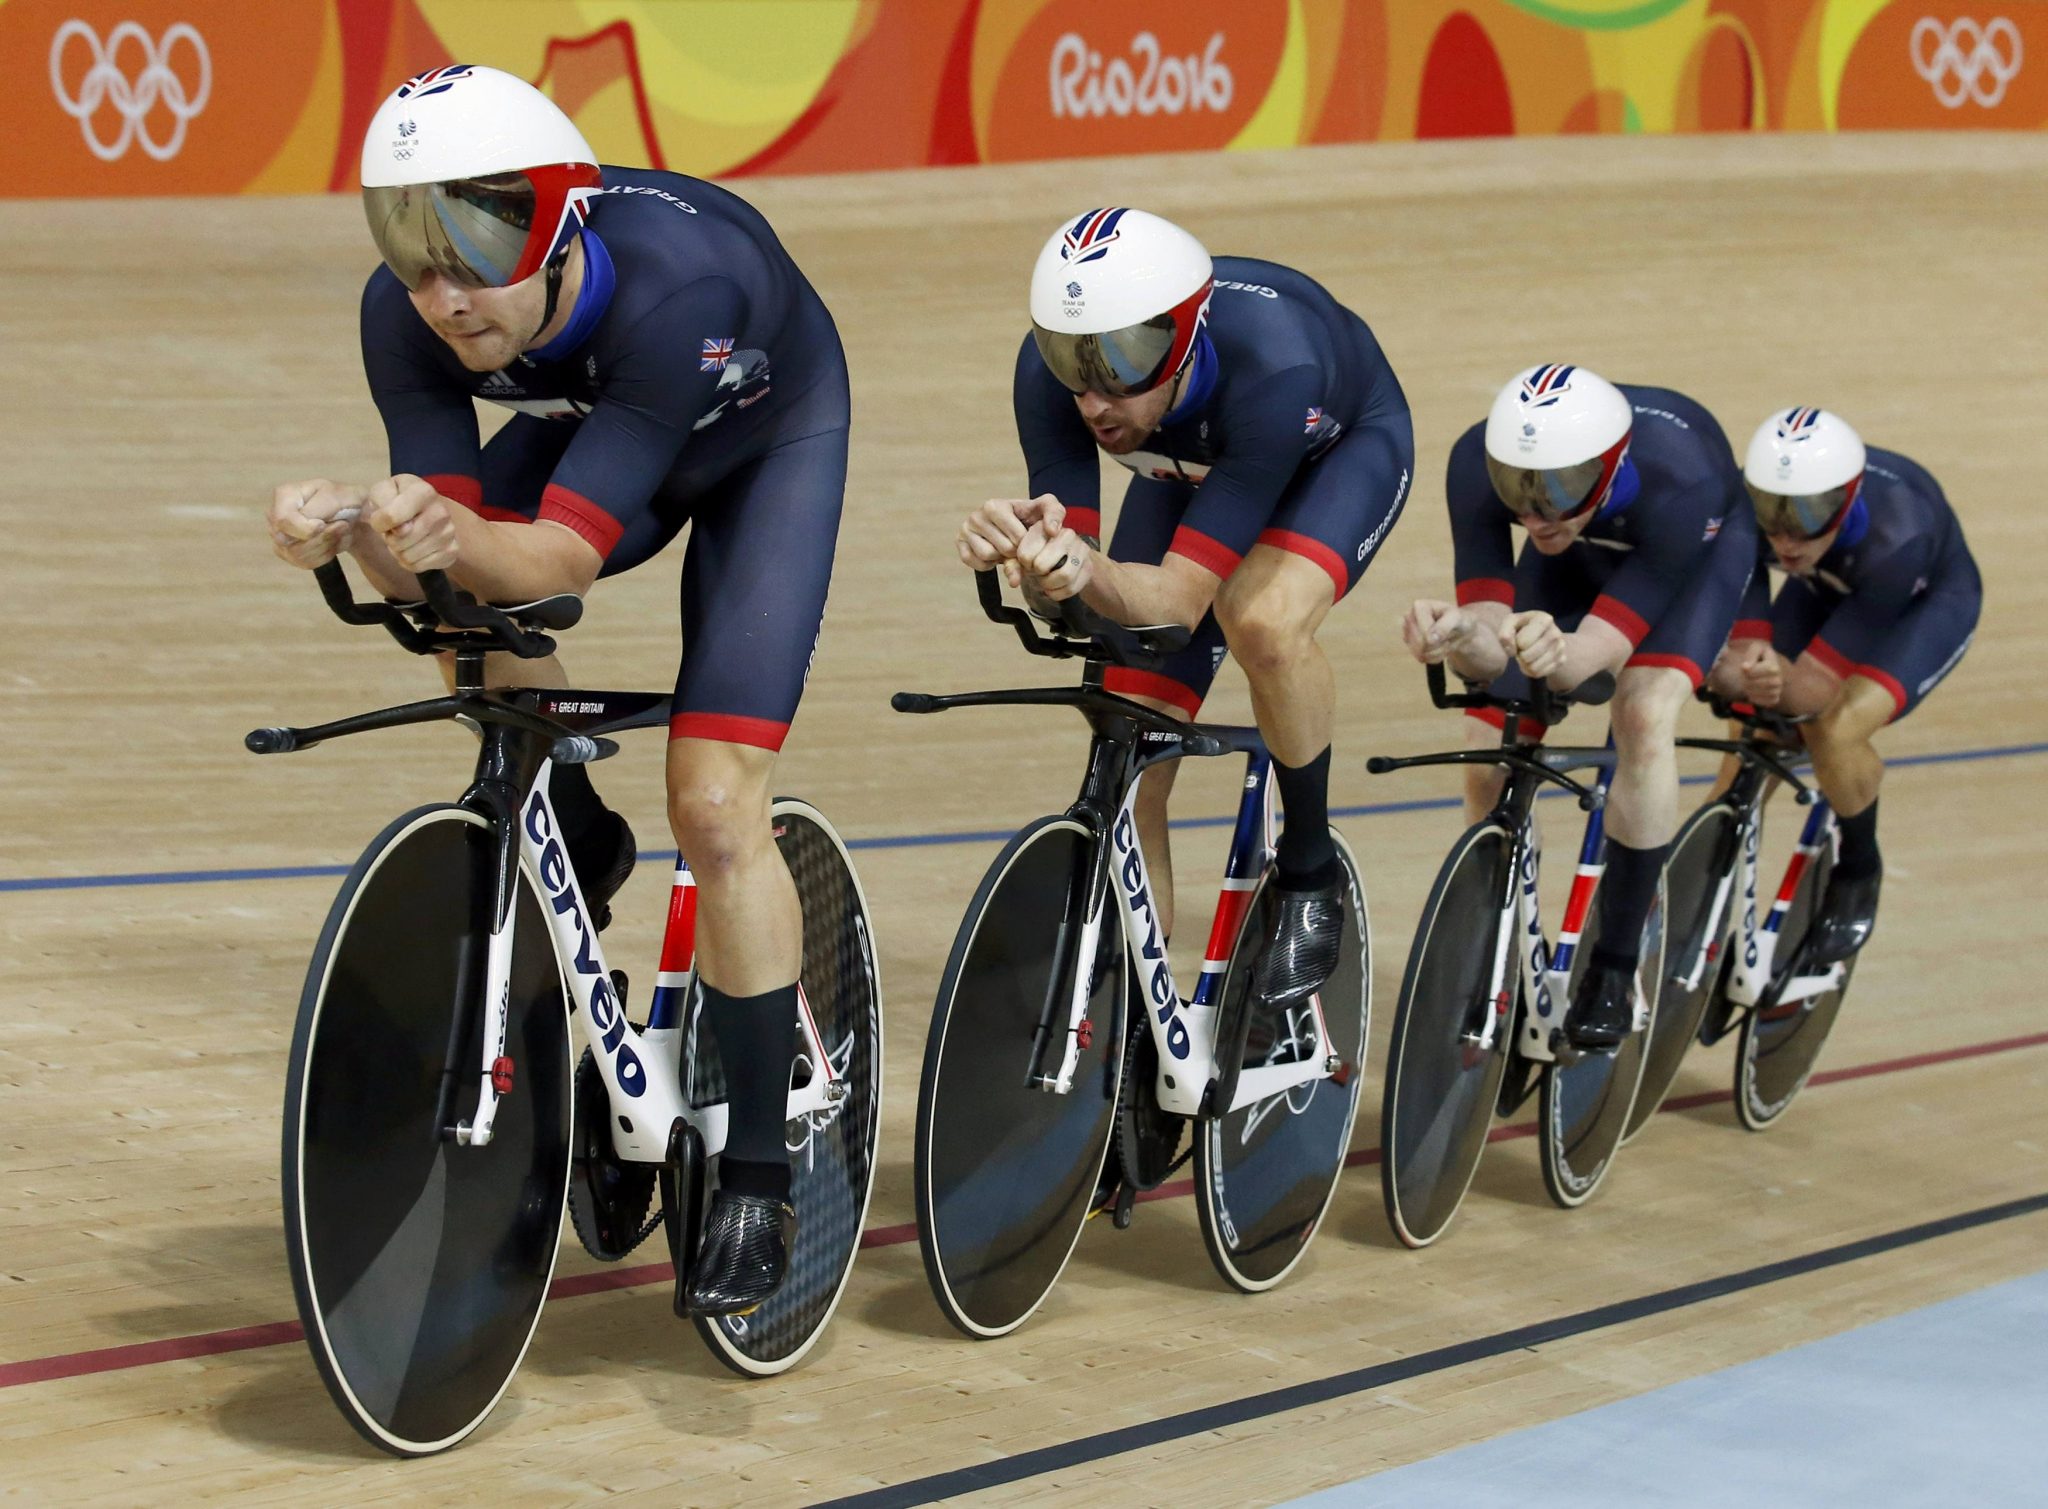 2016 Rio Olympics - Cycling Track - Final - Men's Team Pursuit Final Gold Race - Rio Olympic Velodrome - Rio de Janeiro, Brazil - 12/08/2016. Owain Doull (GBR) of Britain, Bradley Wiggins (GBR) of Britain, Ed Clancy (GBR) of Britain and Steven Burke (GBR) of Britain compete. REUTERSEric Gaillard FOR EDITORIAL USE ONLY. NOT FOR SALE FOR MARKETING OR ADVERTISING CAMPAIGNS.